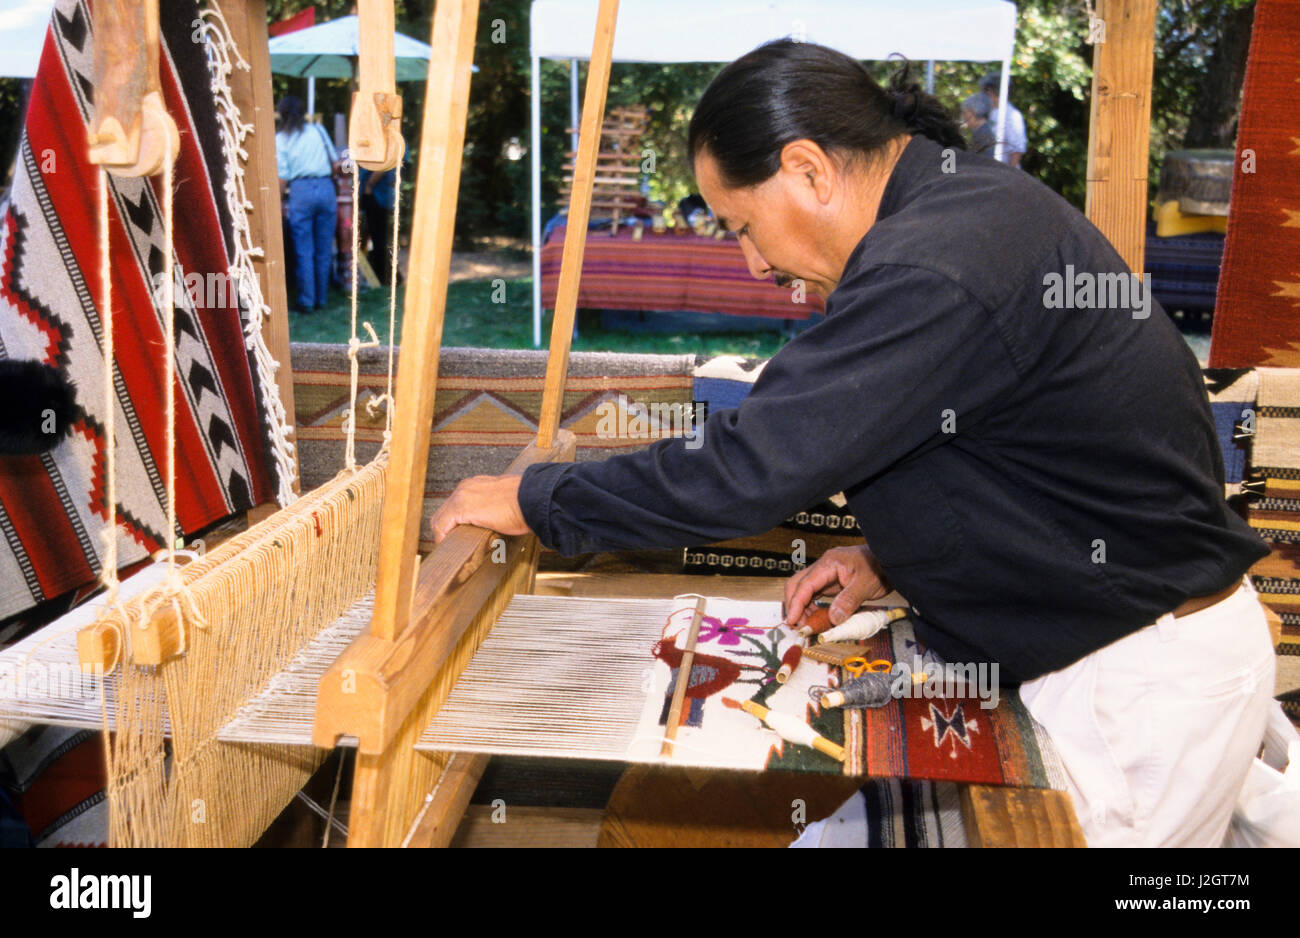 Aztec man demonstrates the use of a wooden weaving loom to make an Aztec pattern on a wall hanging. Stock Photo